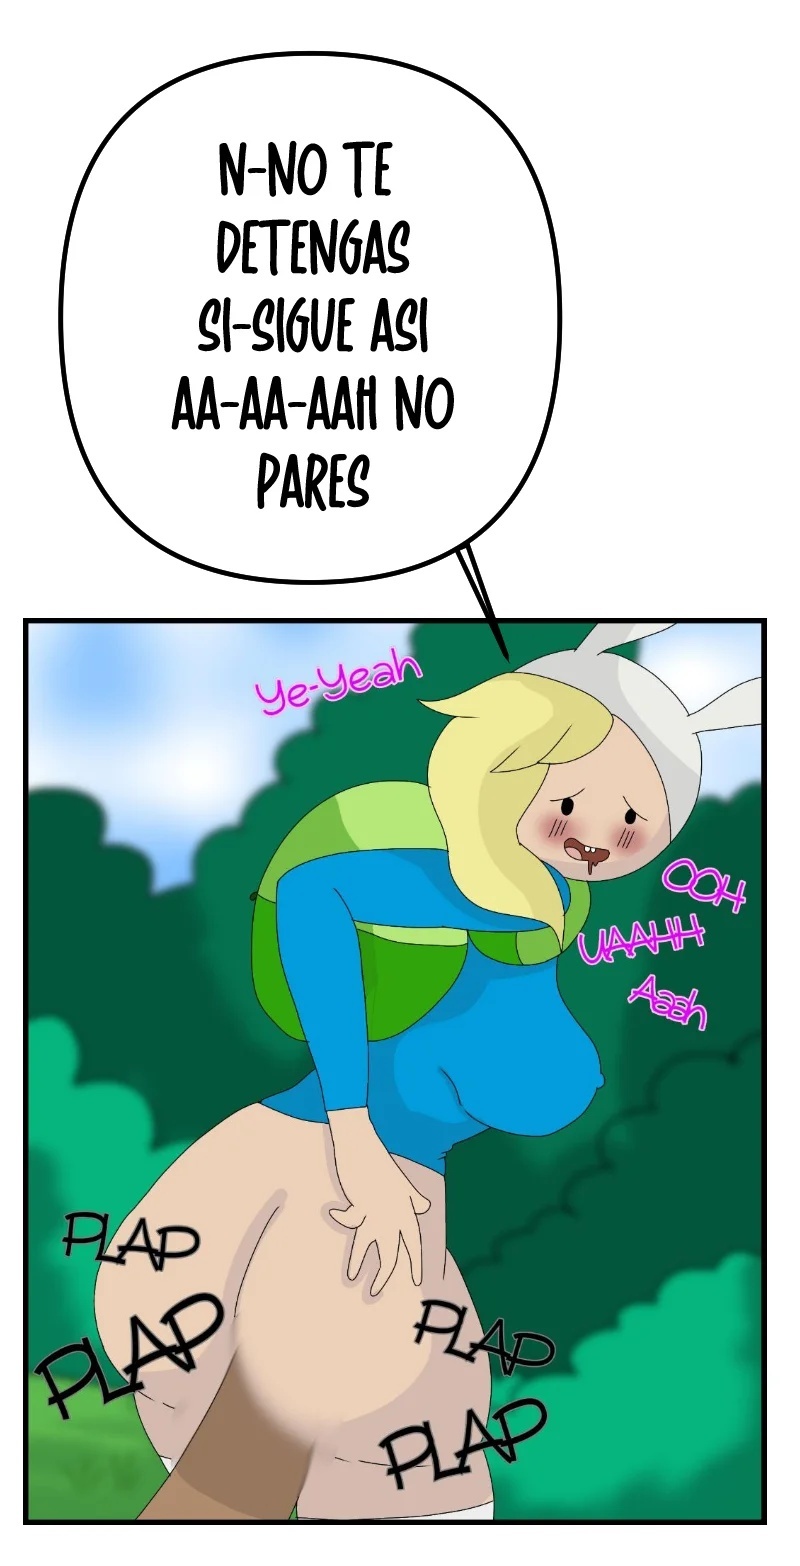 Fionna and Cake Adult time 1 - 27